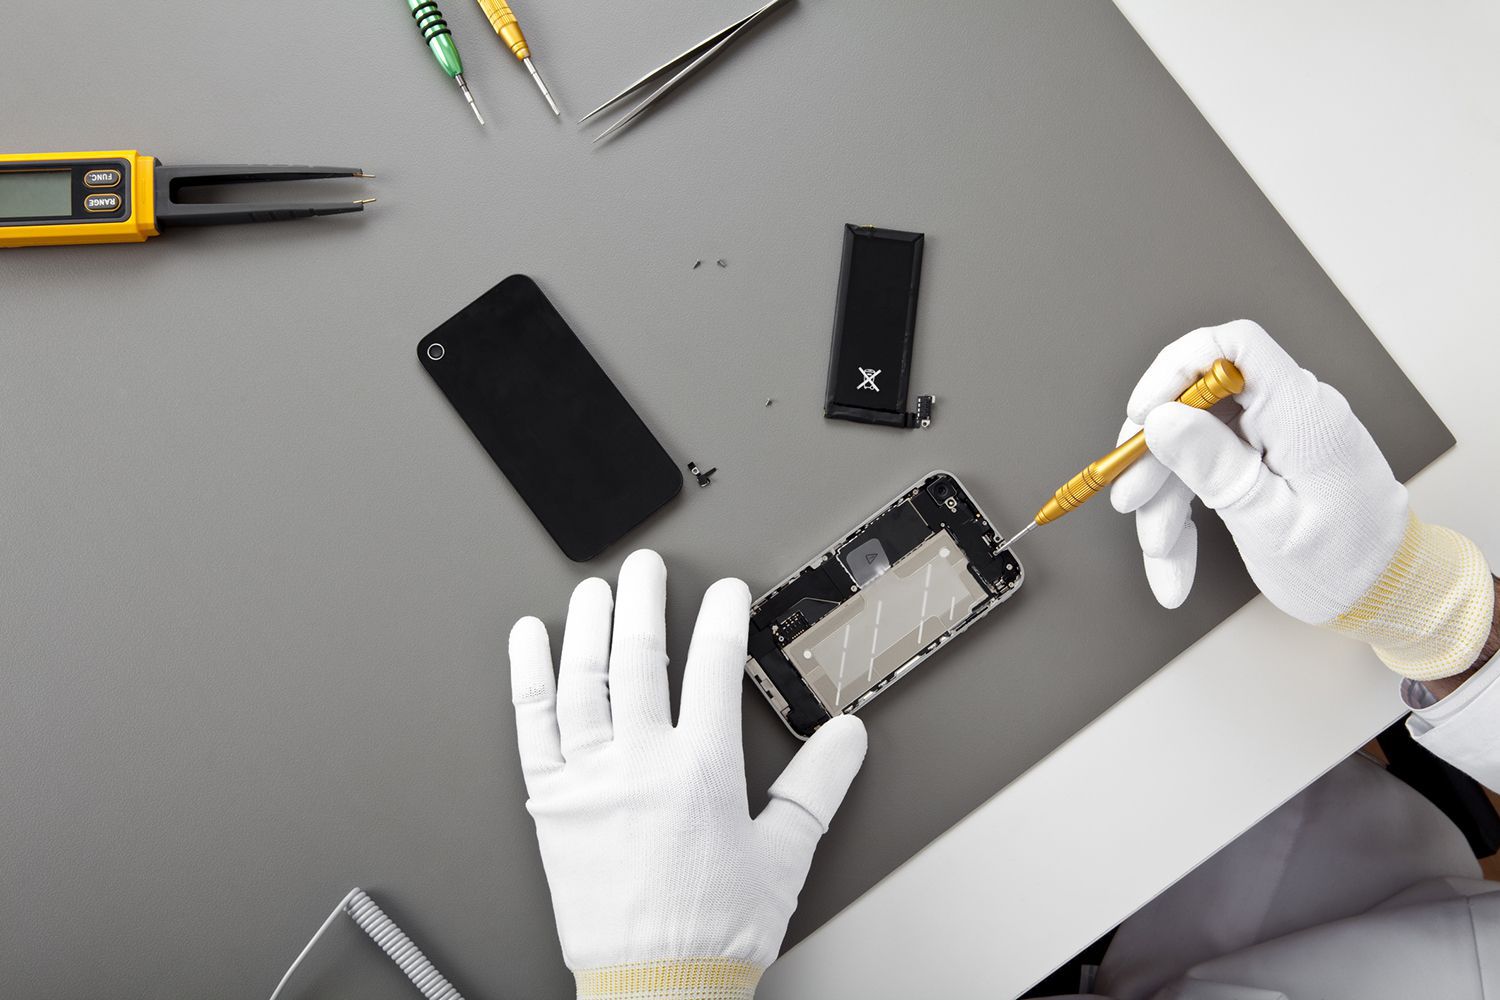 Android Smartphone Battery Replacement